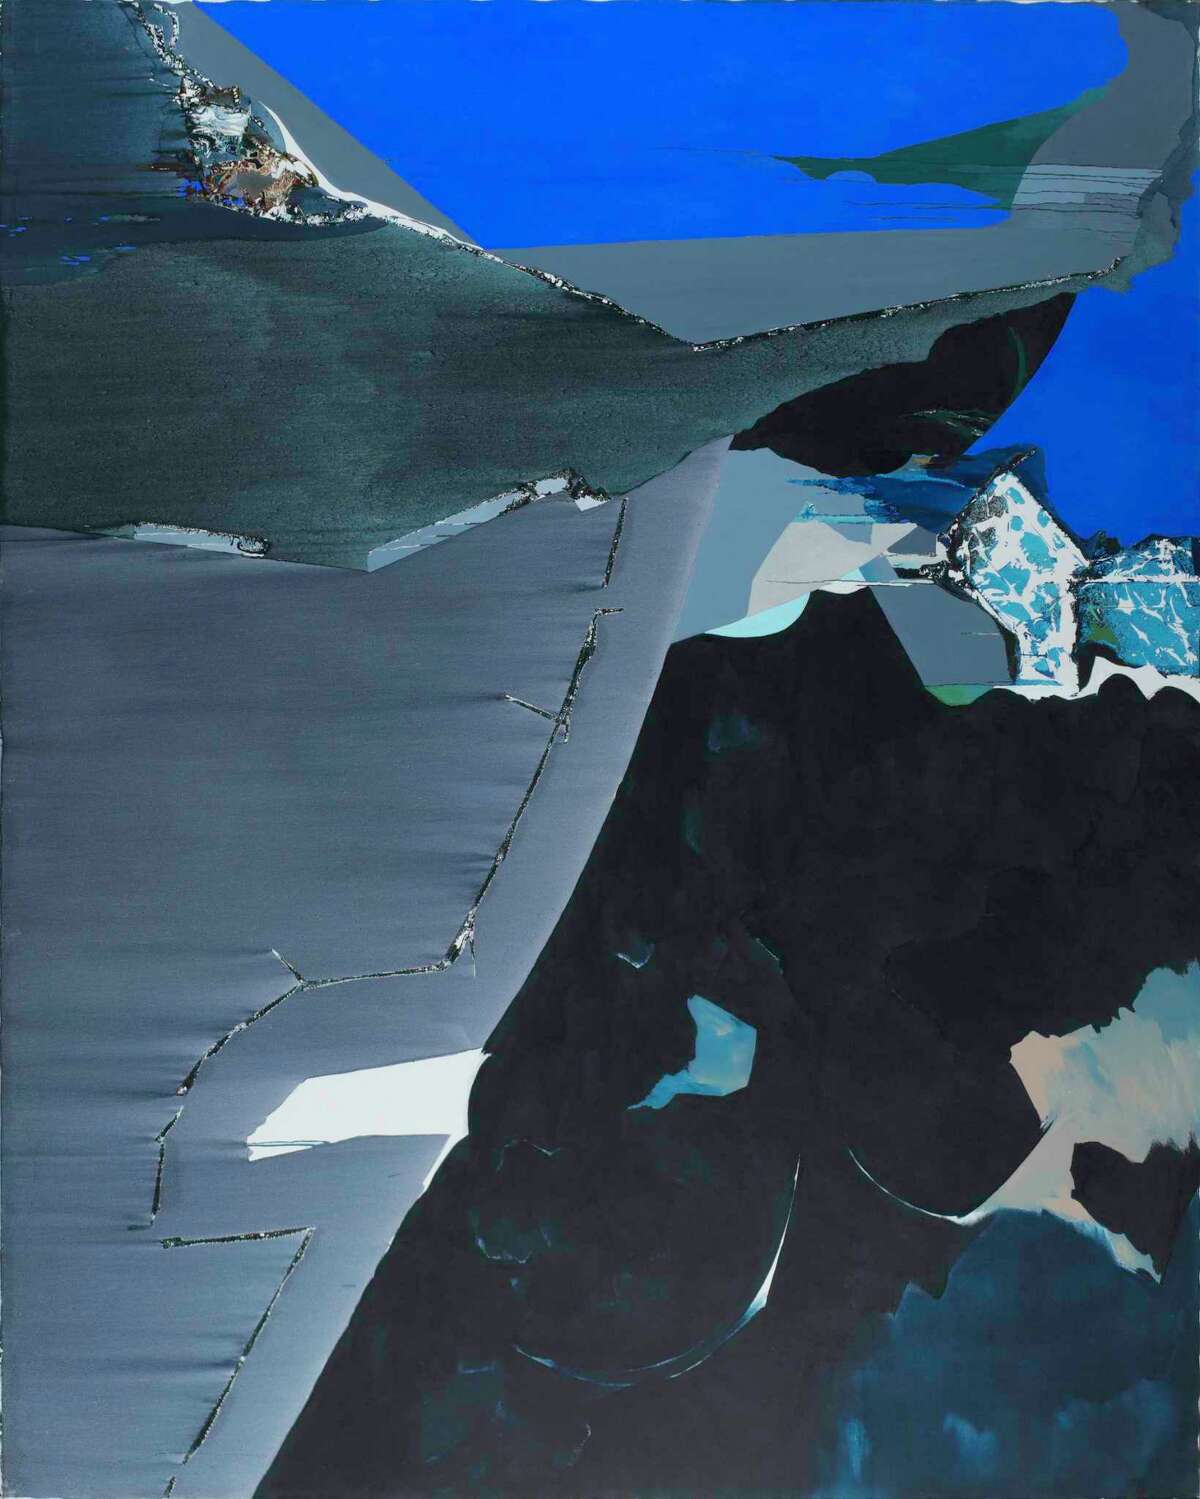 Dorothy Hood’s 1974 painting “Flying in Outer Space” can be seen in “Texas Women: A New History of Abstract Art” at the San Antonio Museum of Art. It is one of the images from the show that can be viewed virtually on the museum’s website.